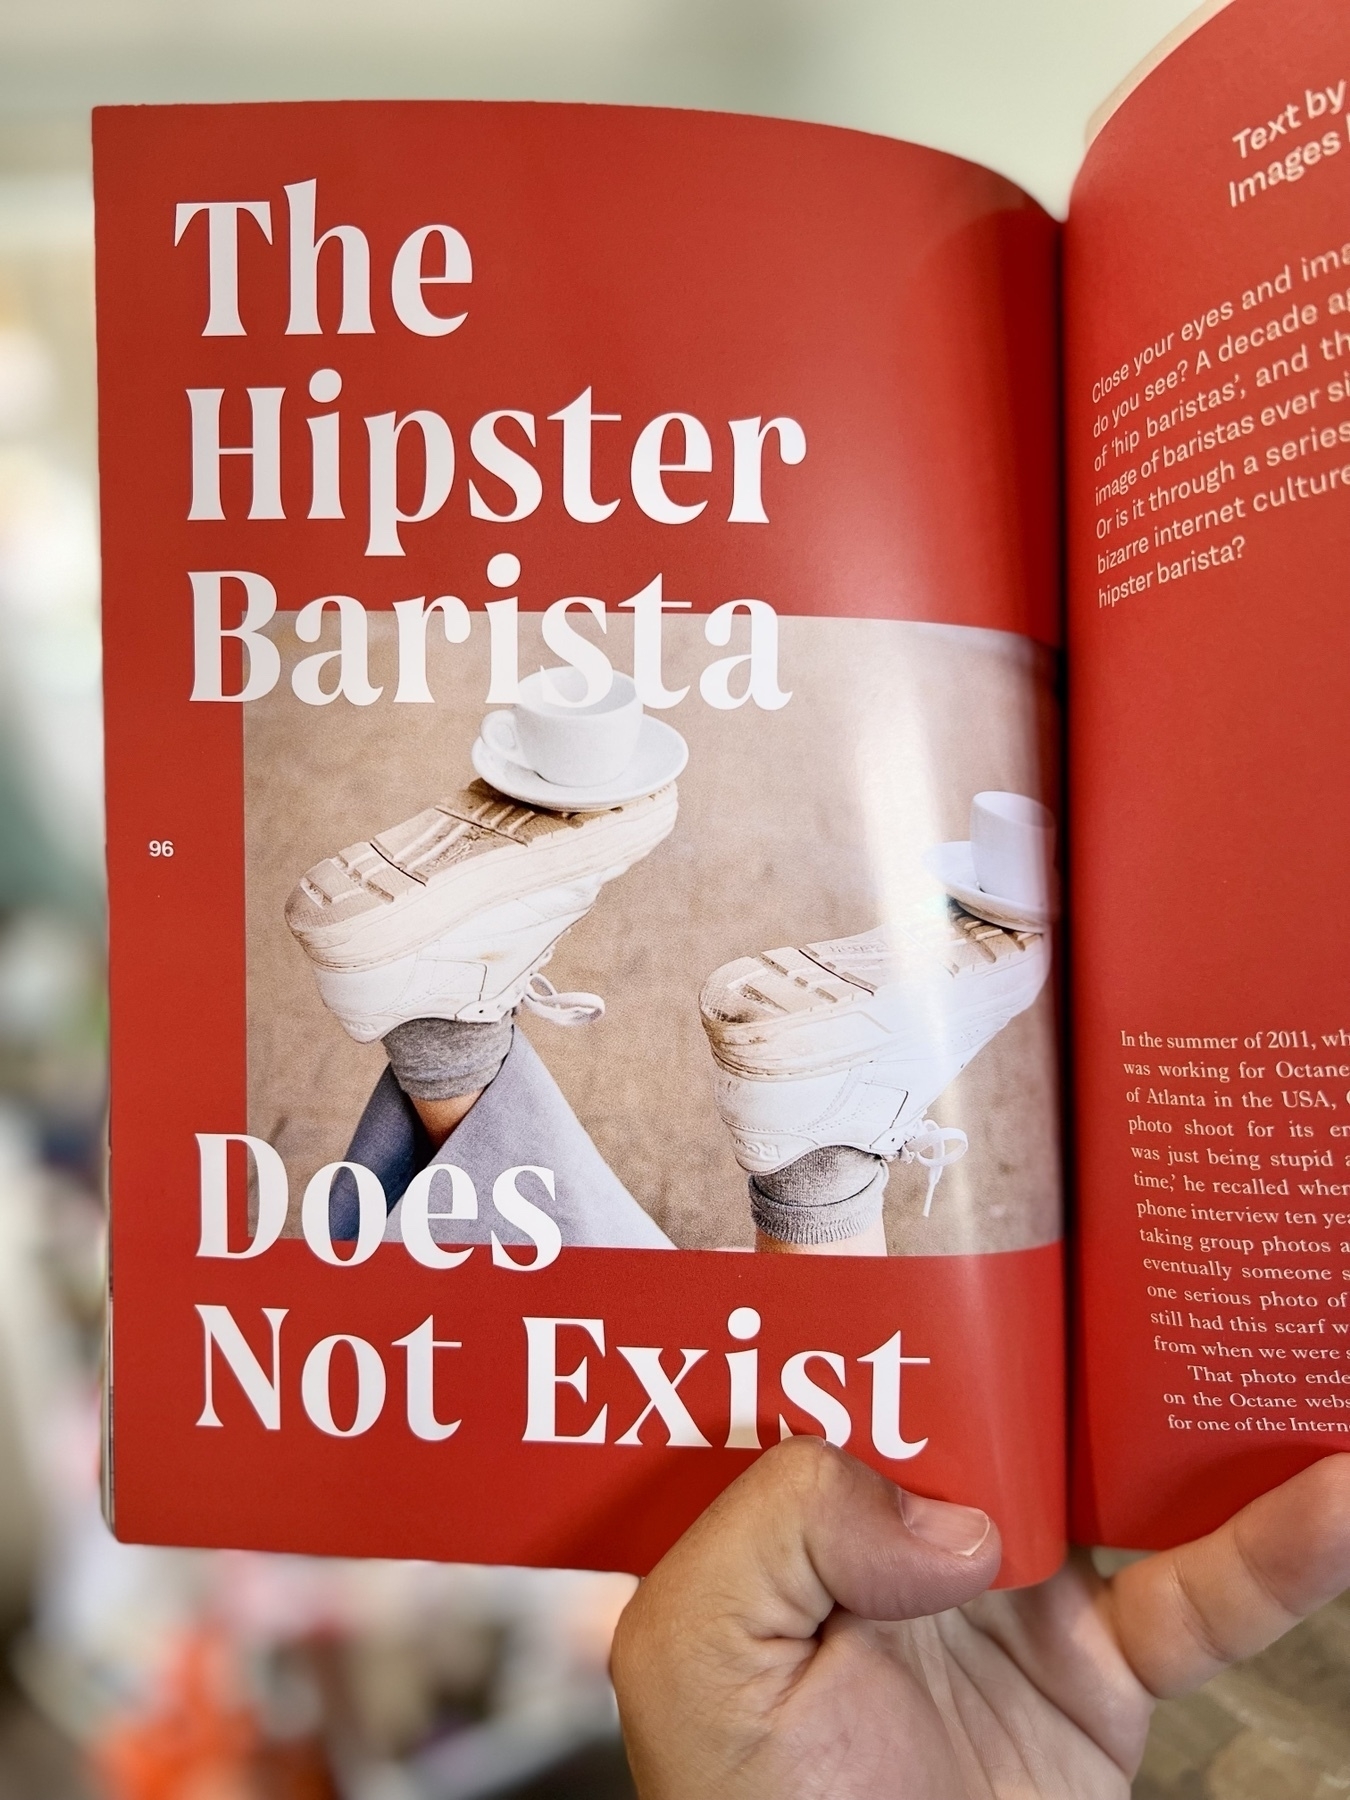 A feature entitled "the hipster barista dies not exist" from Standart magazine. 